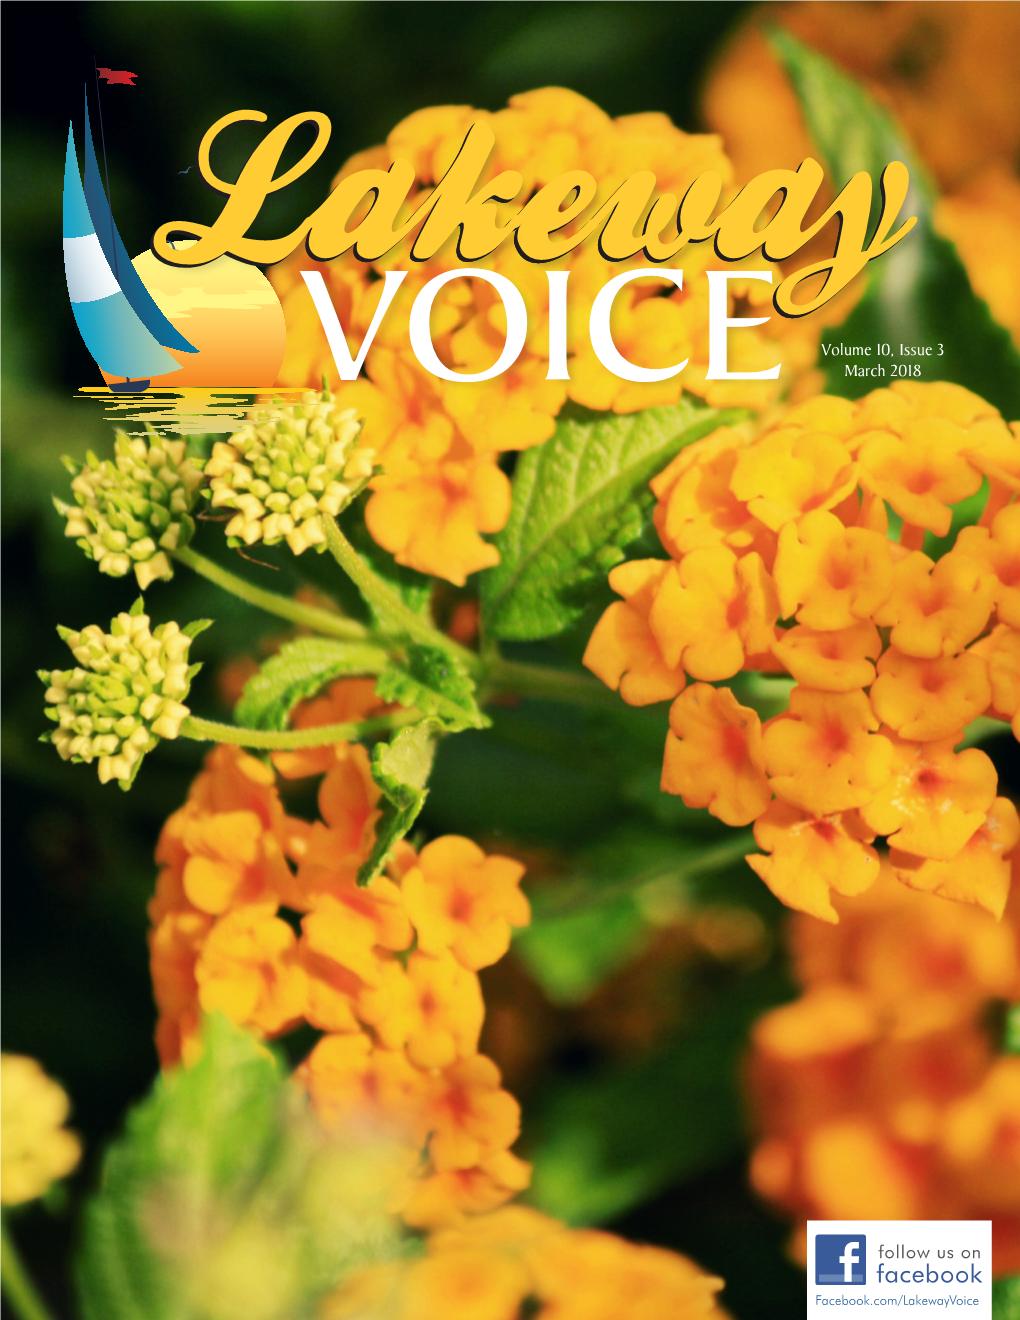 Volume 10, Issue 3 March 2018